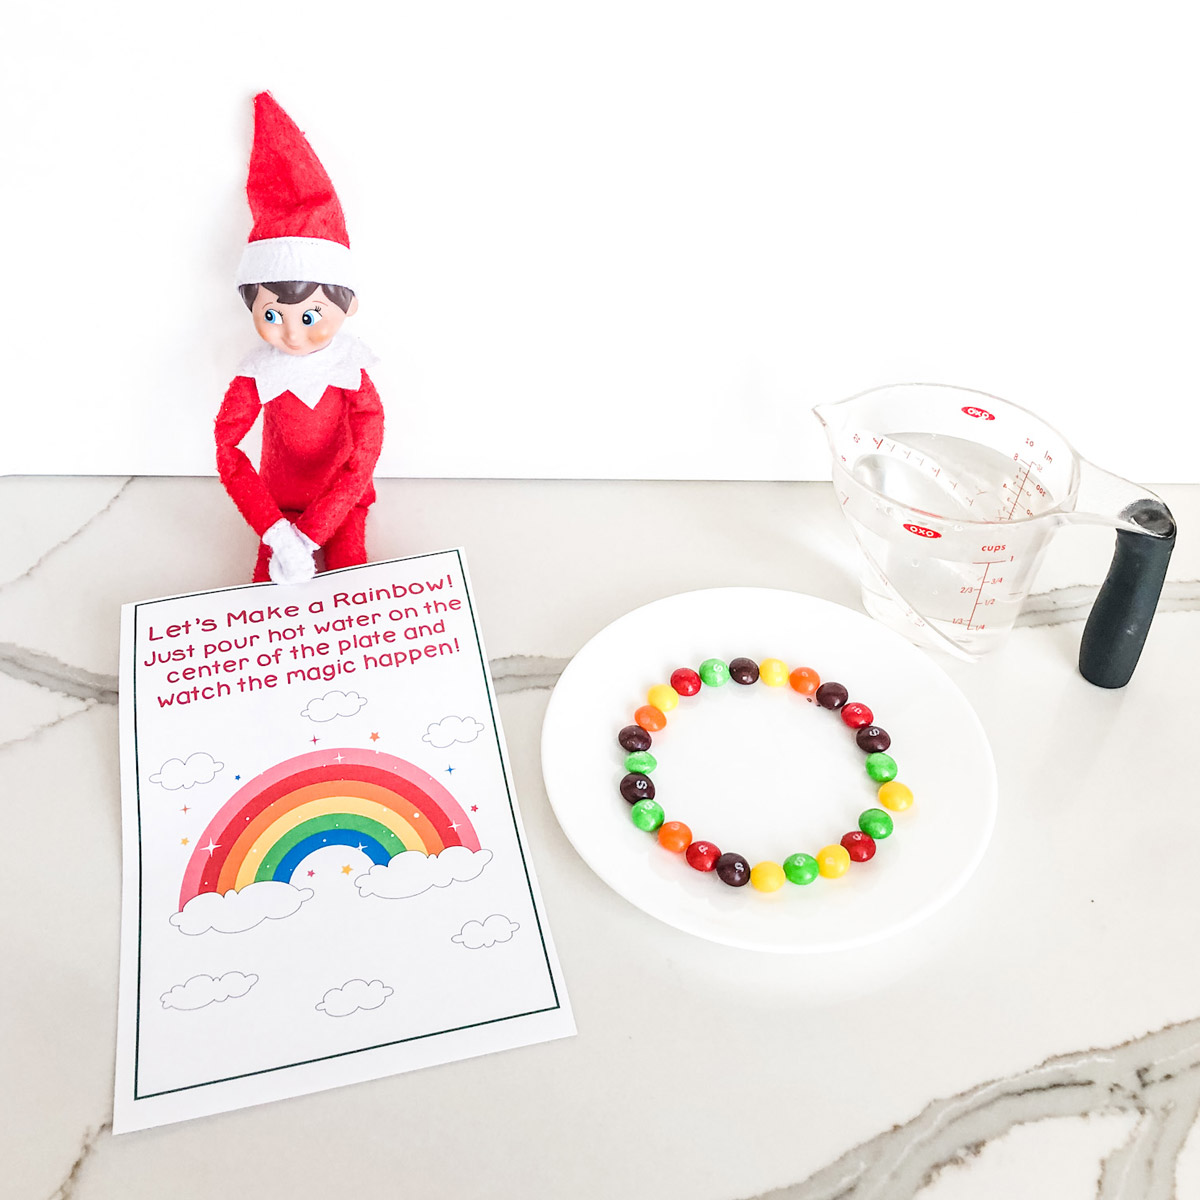 This image shows the Elf on the Shelf skittles rainbow printable that you can get for free at the end of this blog post. The Elf on the Shelf is sitting with a plate of skittles, the free printable skittles magic note and a measuring cup of water..